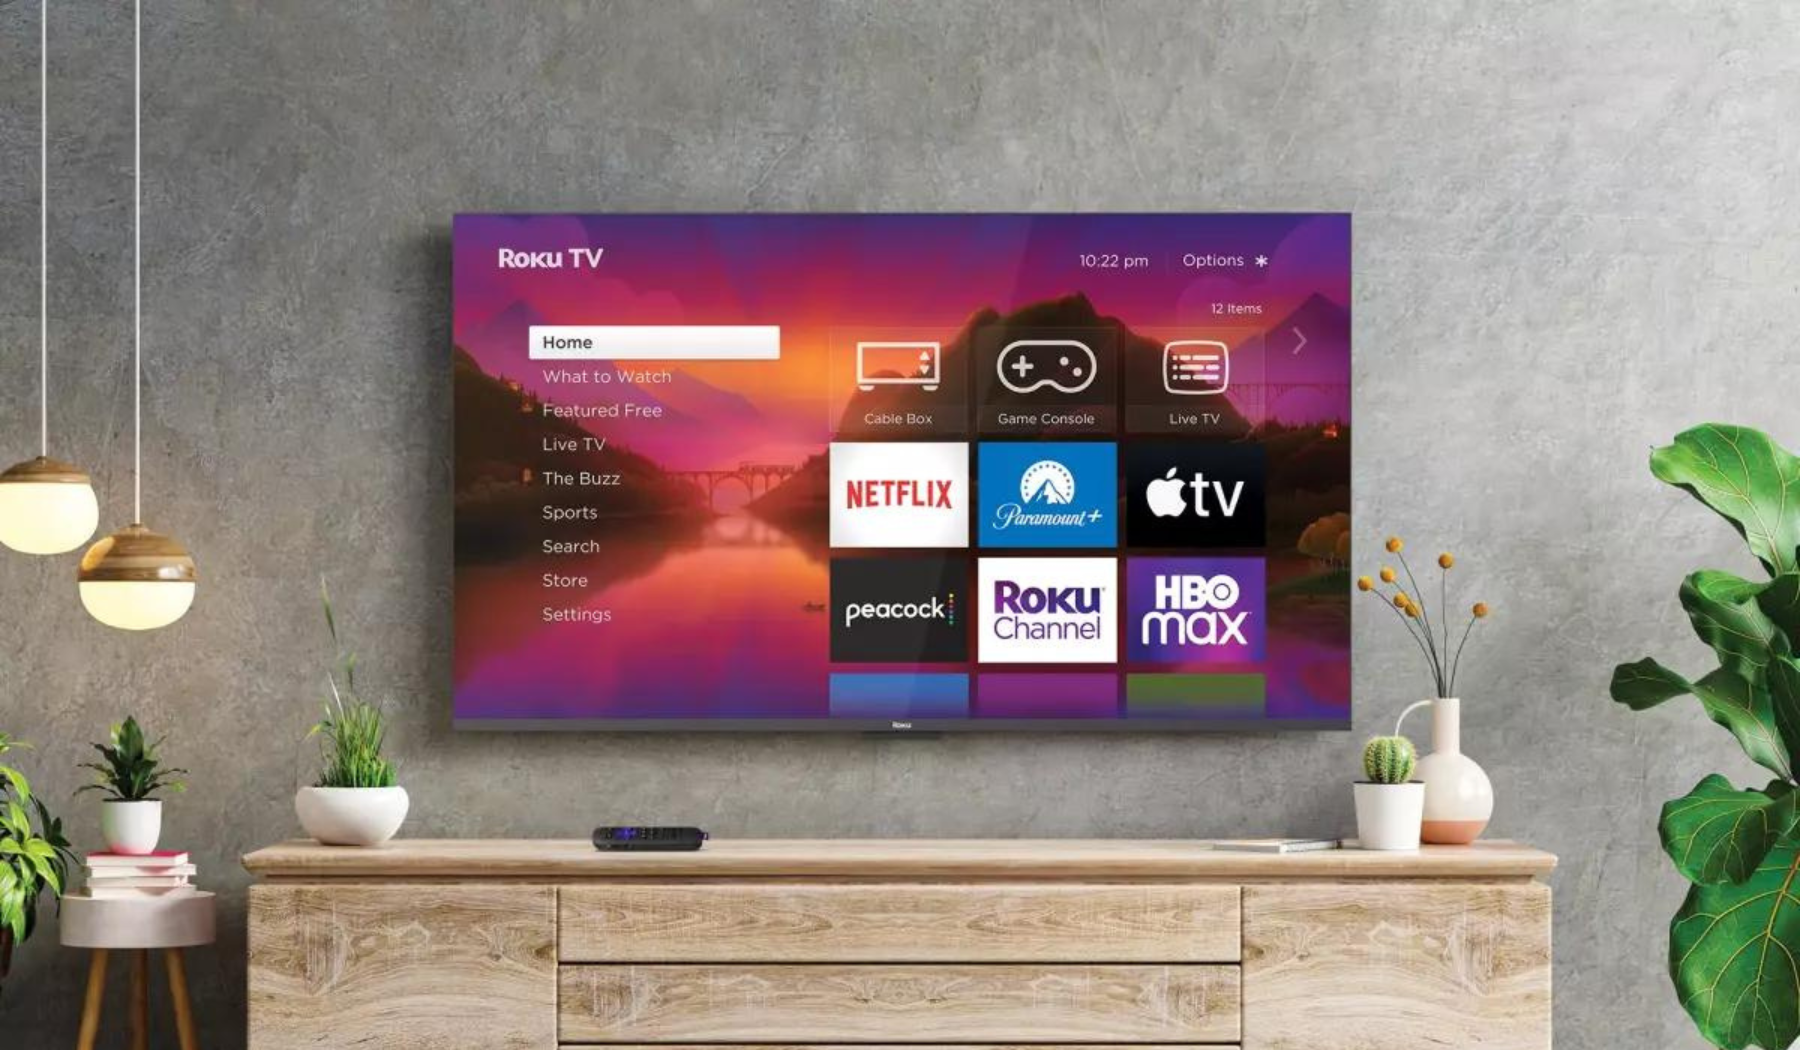 Hanging TV with streaming apps and Roku smart TV platform on screen with furniture and plants in peripherals